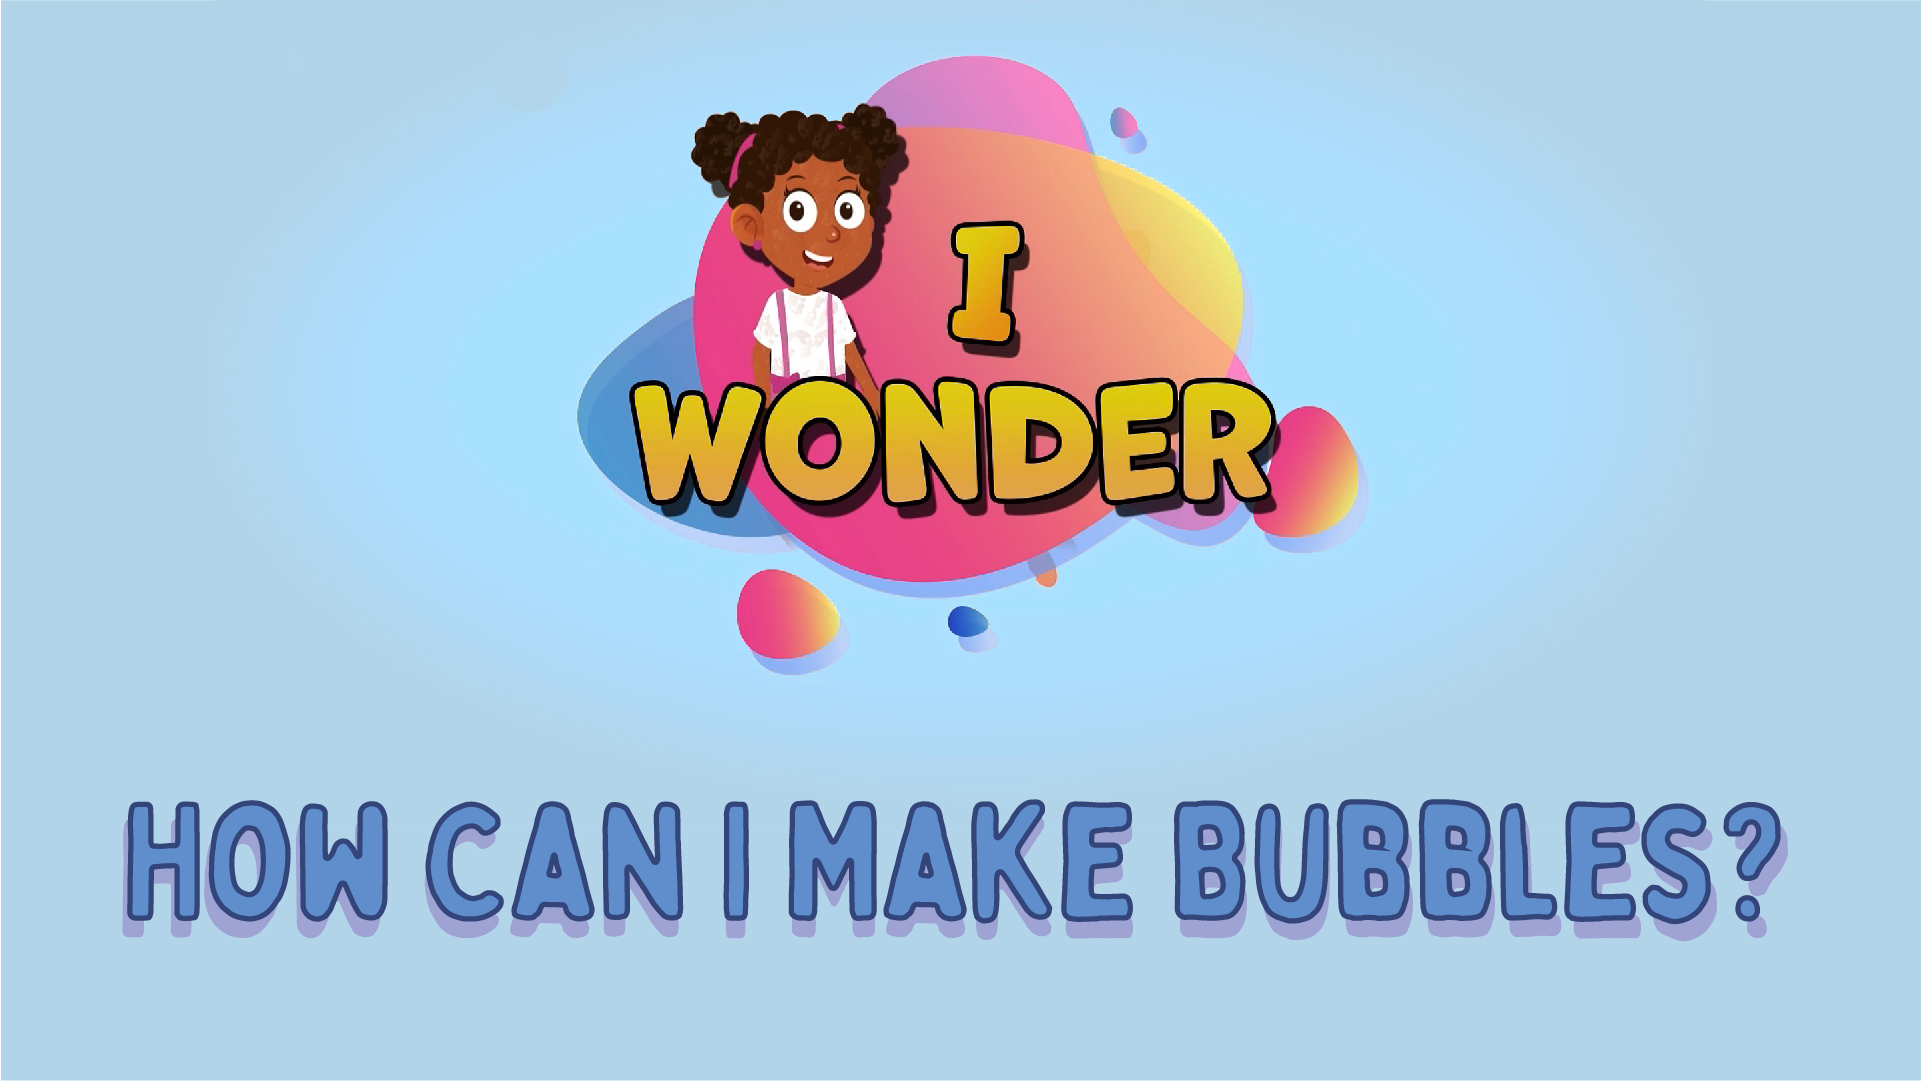 How Can I Make Bubbles?